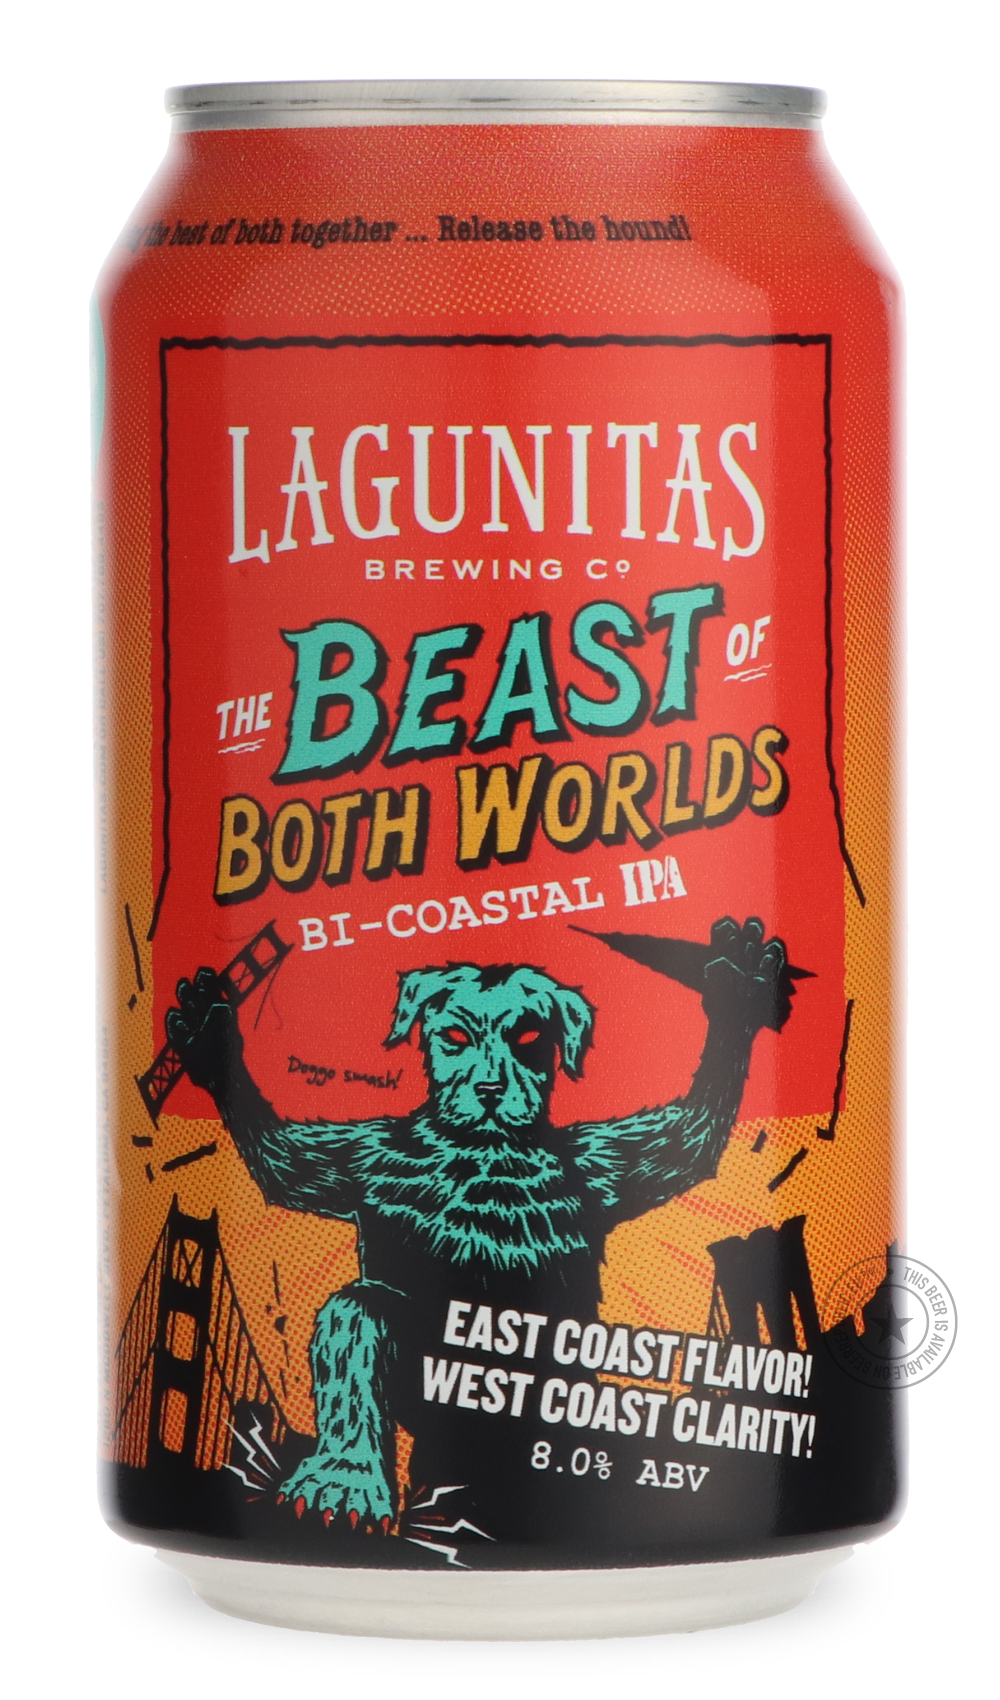 -Lagunitas- The Beast of Both Worlds-IPA- Only @ Beer Republic - The best online beer store for American & Canadian craft beer - Buy beer online from the USA and Canada - Bier online kopen - Amerikaans bier kopen - Craft beer store - Craft beer kopen - Amerikanisch bier kaufen - Bier online kaufen - Acheter biere online - IPA - Stout - Porter - New England IPA - Hazy IPA - Imperial Stout - Barrel Aged - Barrel Aged Imperial Stout - Brown - Dark beer - Blond - Blonde - Pilsner - Lager - Wheat - Weizen - Ambe